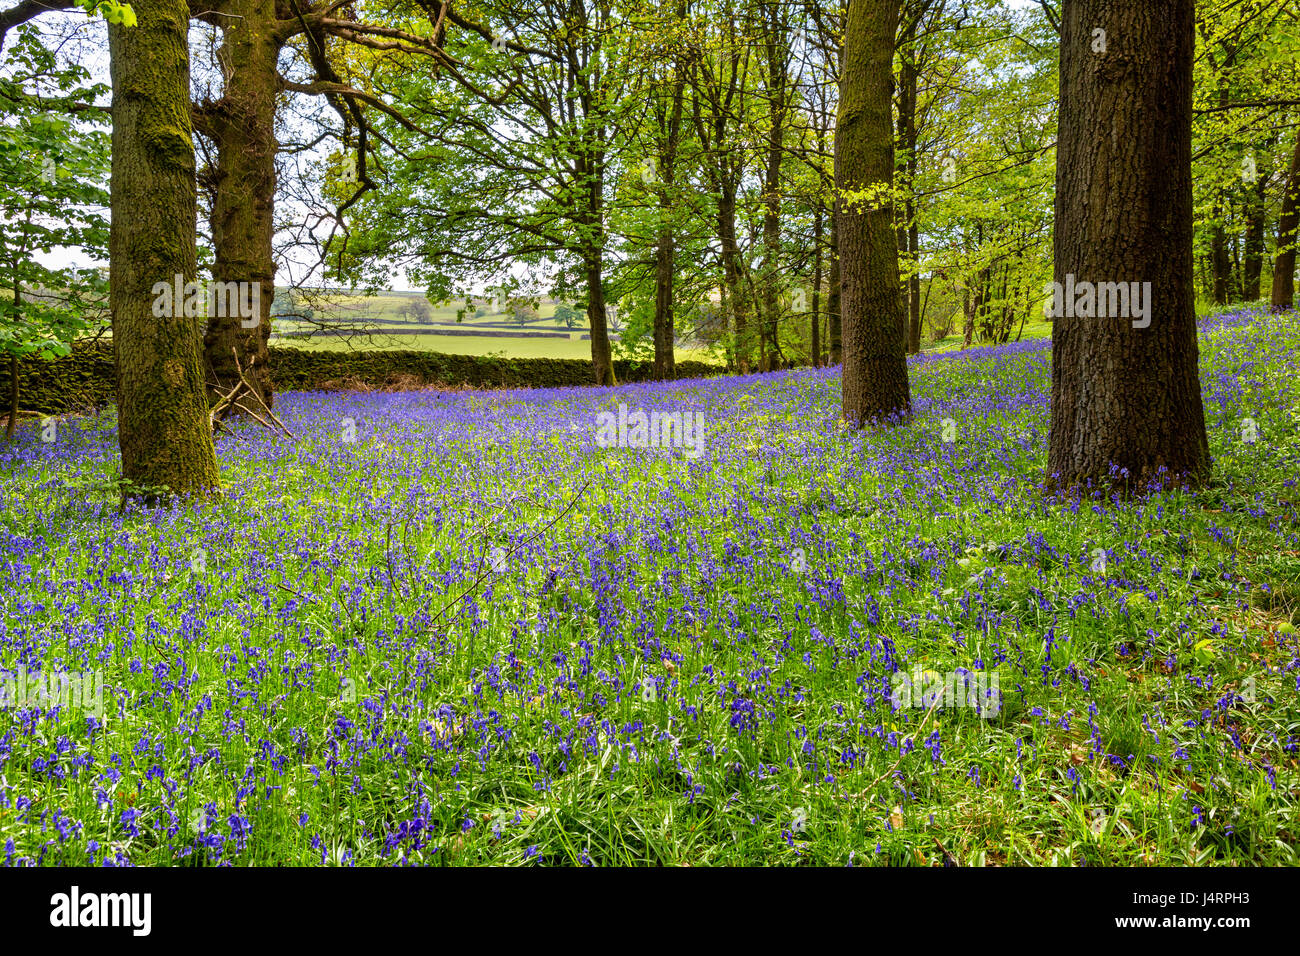 Bluebells in Strid Wood, near Bolton Abbey, Yorkshire Dales National Park, North Yorkshire, England, UK Stock Photo